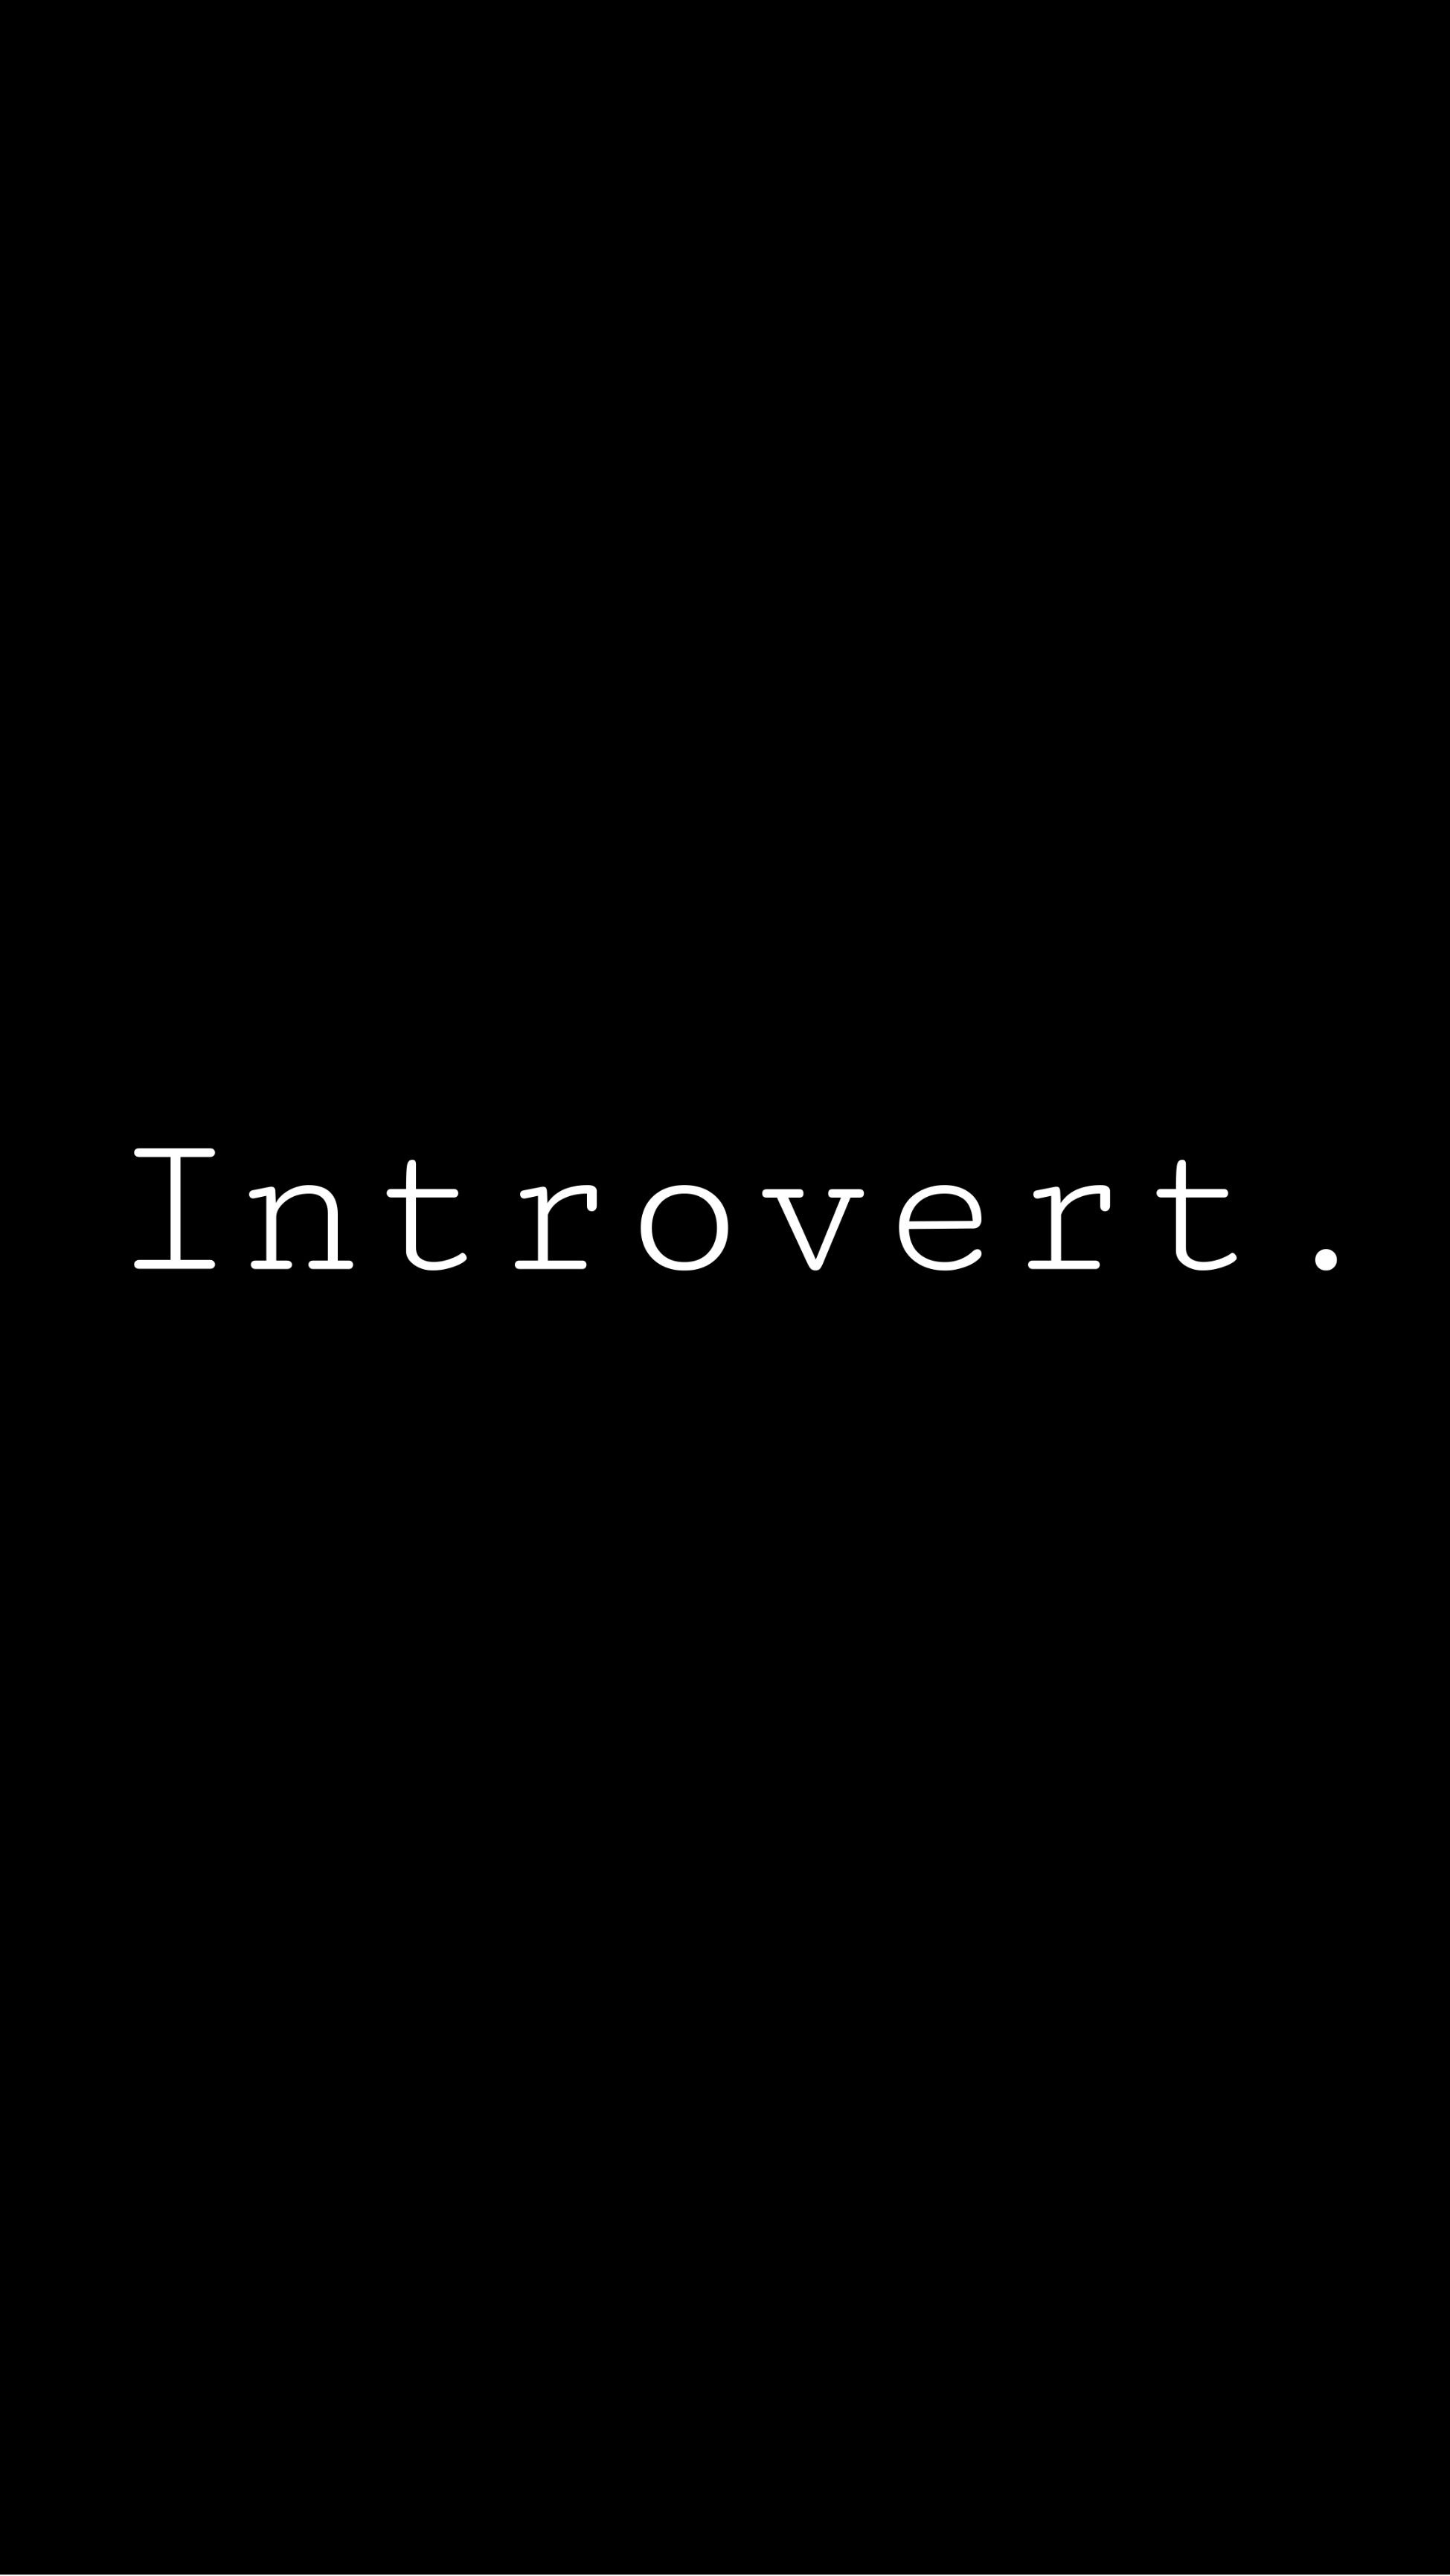 Introvert Photos, Download The BEST Free Introvert Stock Photos & HD Images